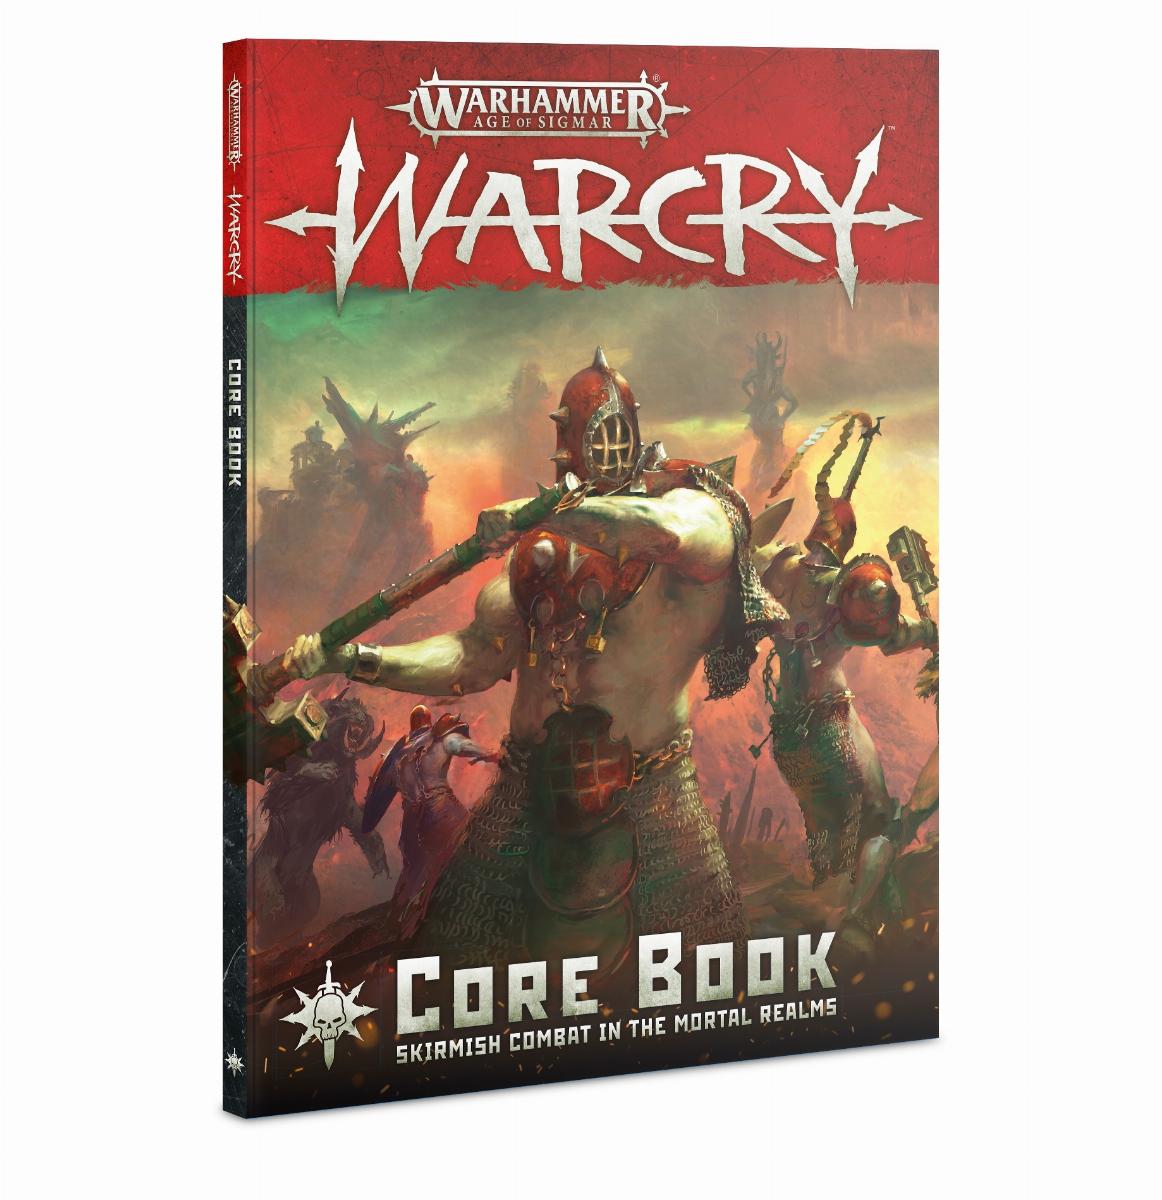 Games Workshop Warcry Core Book